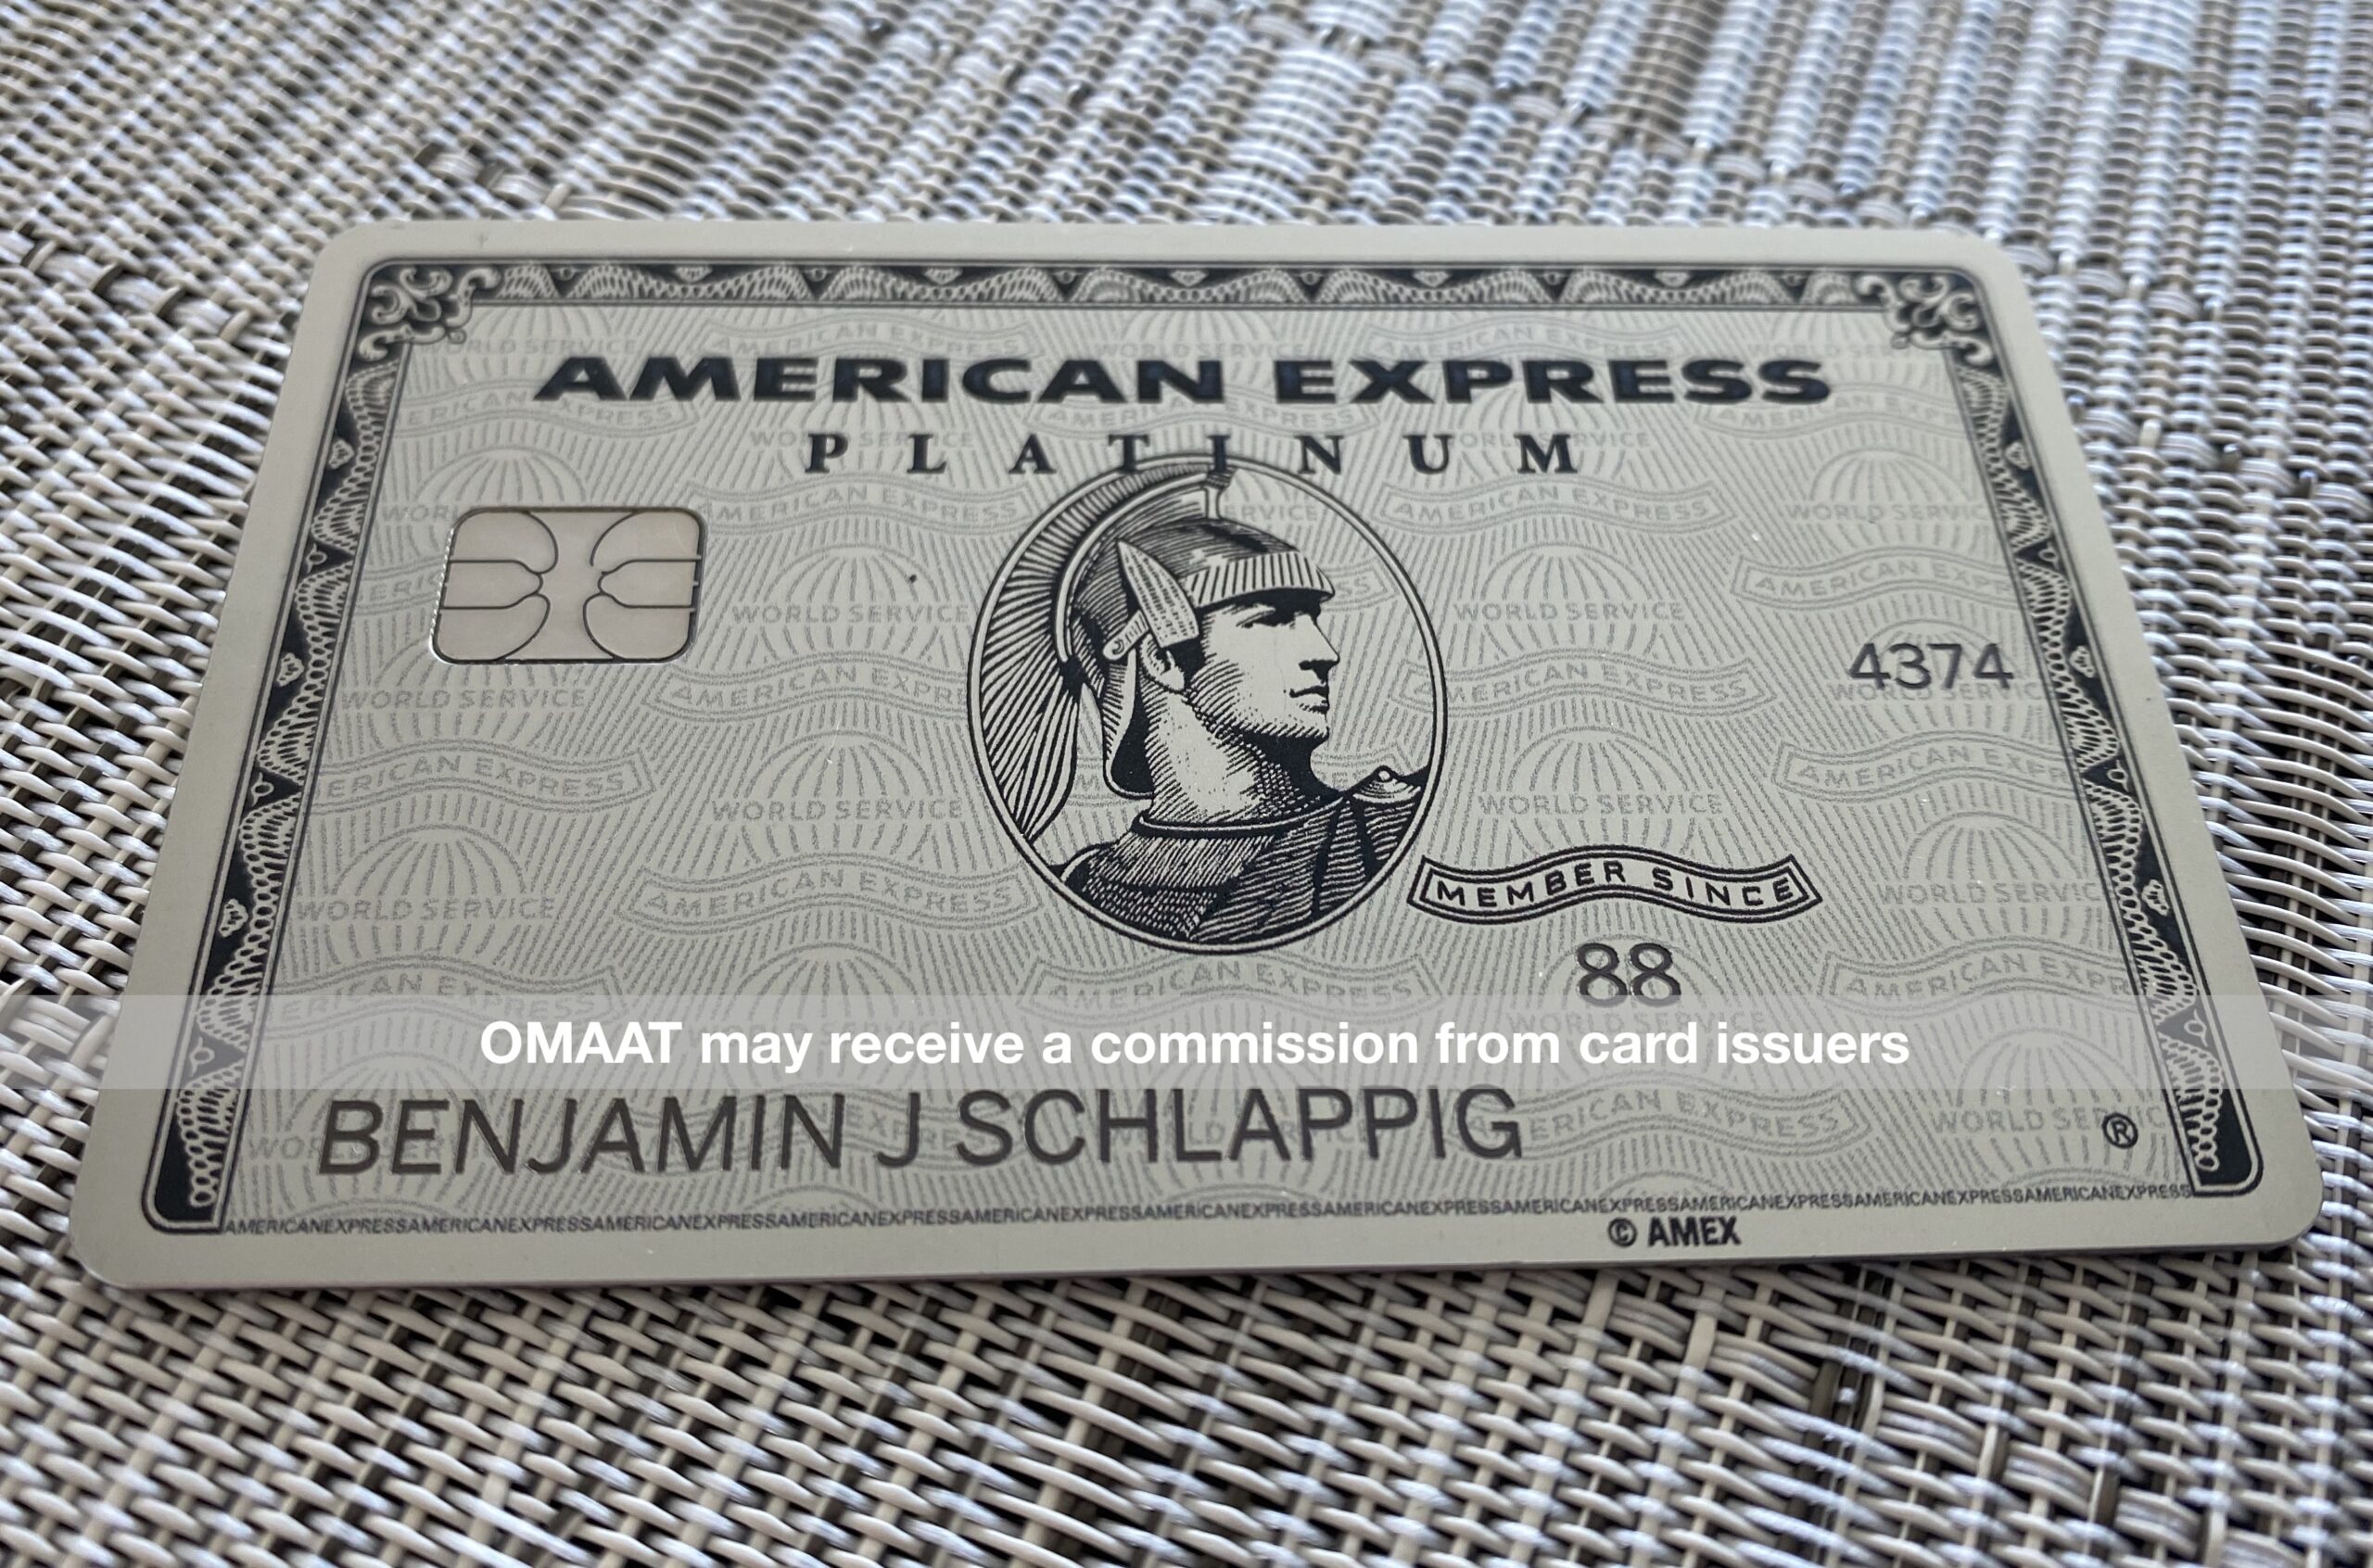 Amex Platinum Offer Free Stuff From Best Buy & Home Depot